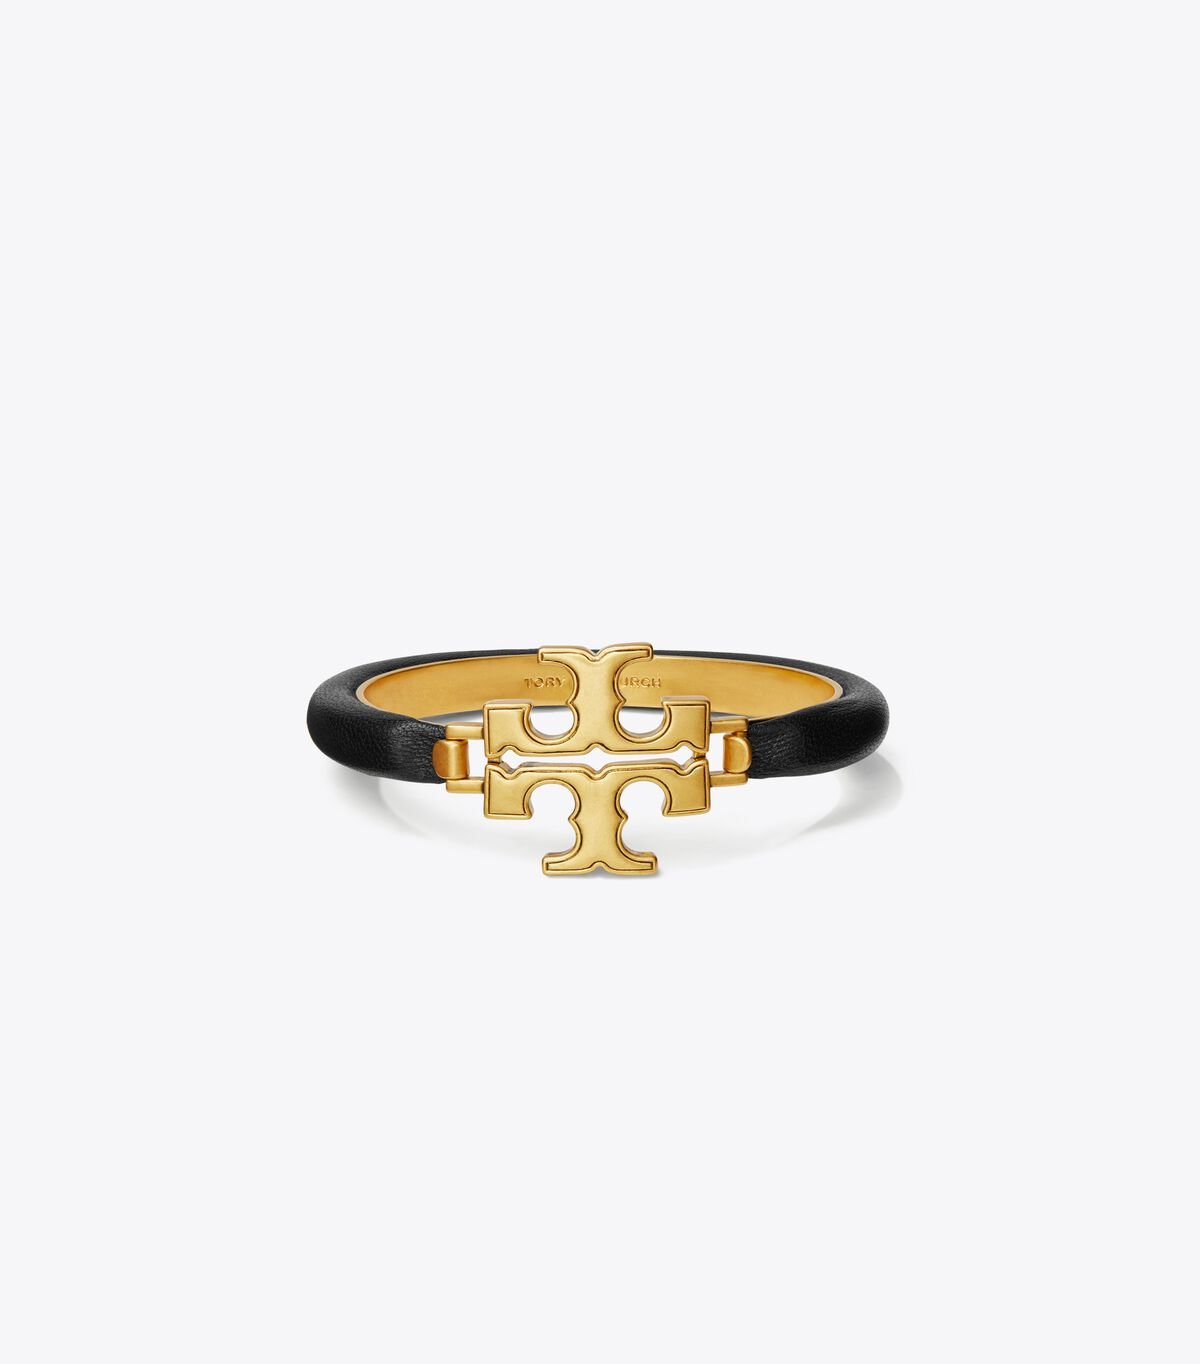 Gold / Black Tory Burch Eleanor Leather Hinged Women's Bracelet | OUTLET-45680919